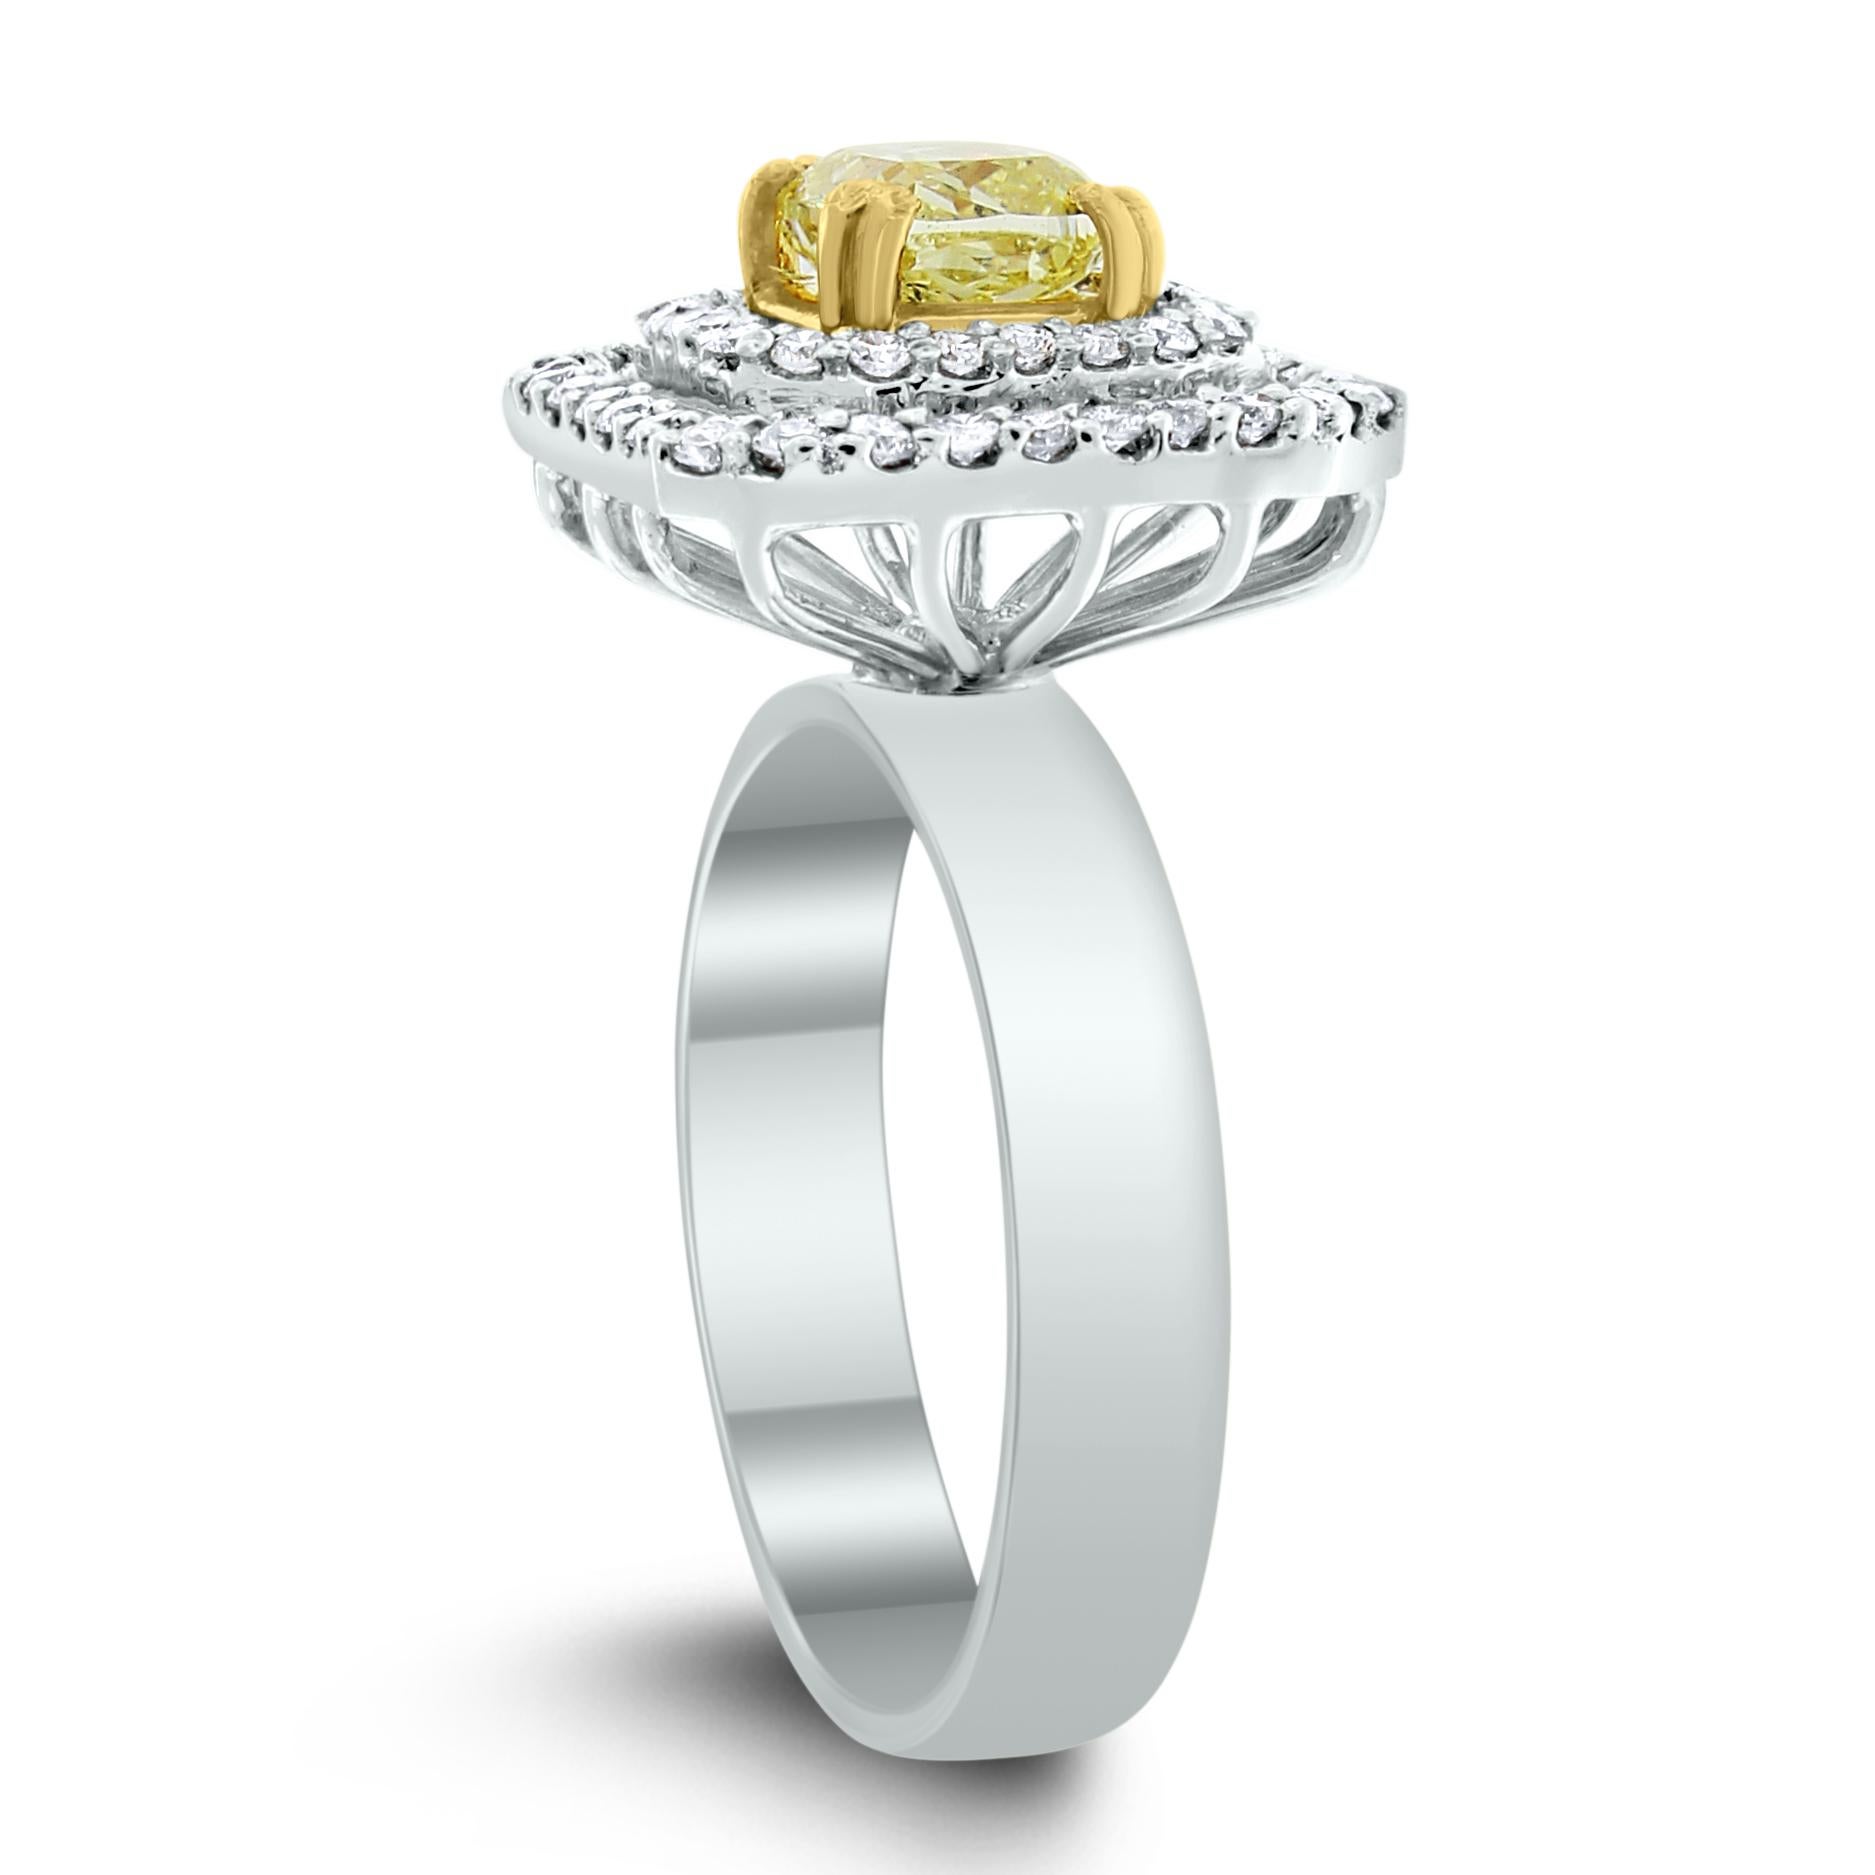 The Beauvince Summer Yellow & White Diamond Ring features a double halo of white diamonds around a dazzling yellow cushion cut diamond to create an eye-catching luminous ring

Diamonds Shapes: Cushion & Round 
Total Diamonds Weight: 1.15 ct
Center